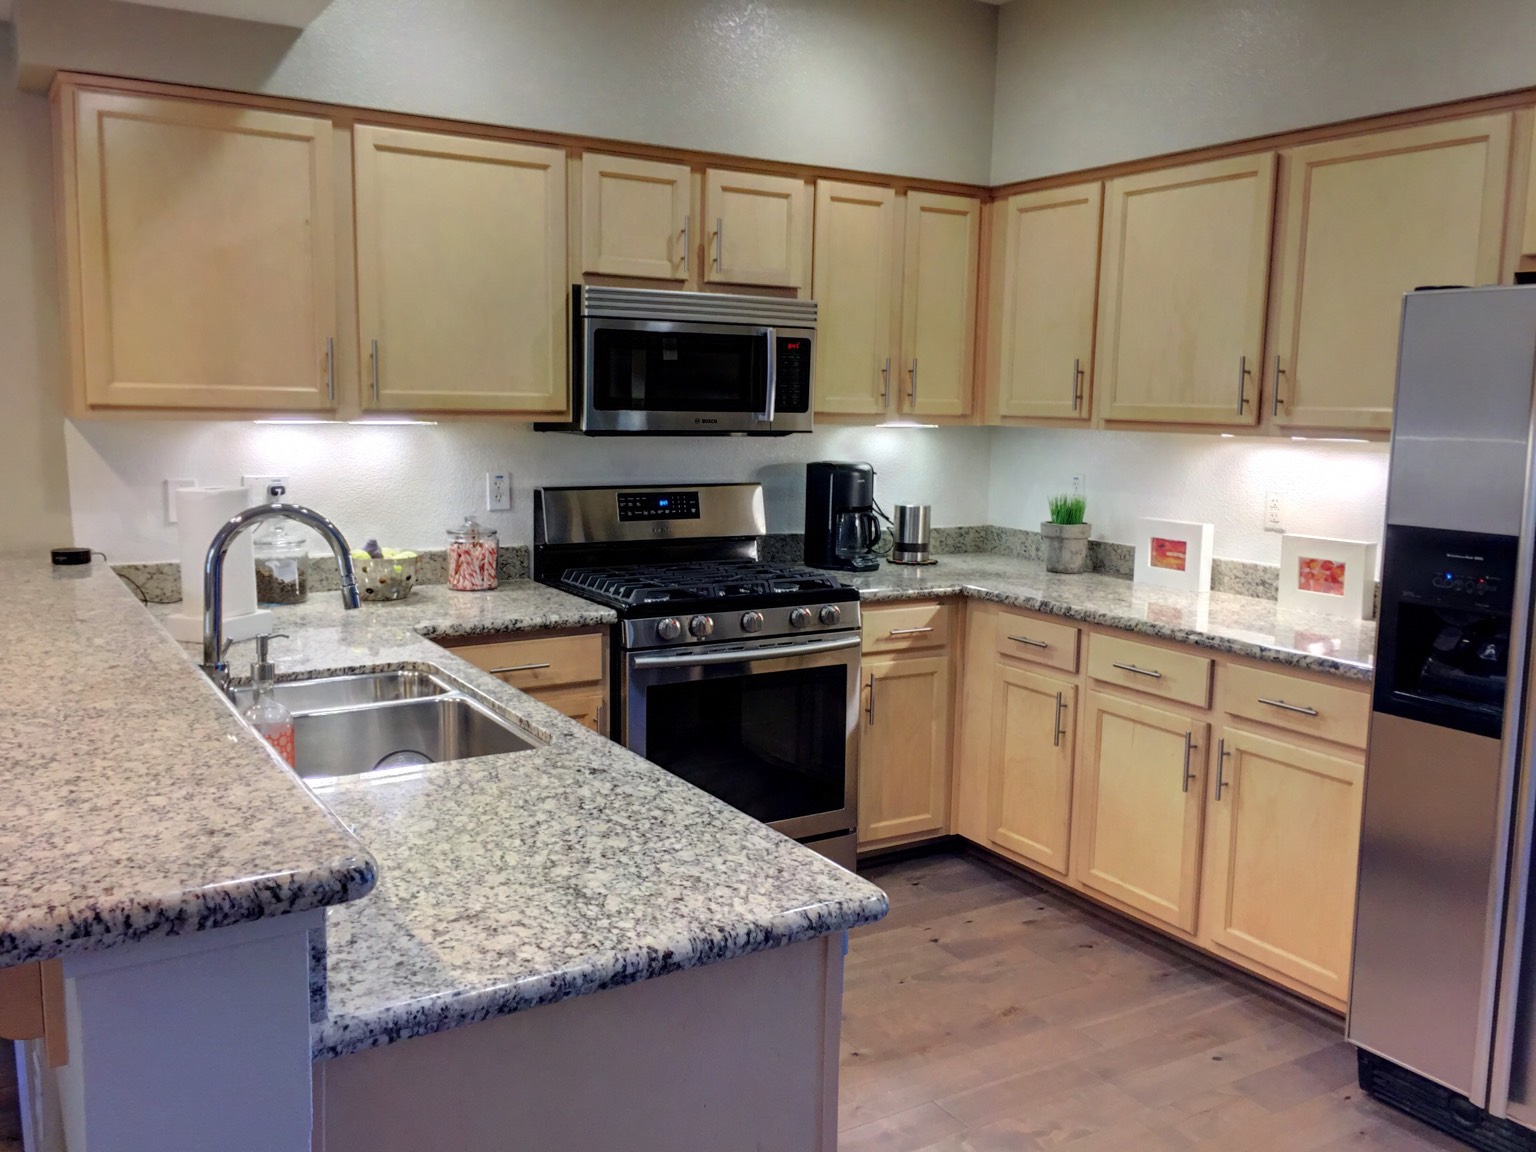 Gas range, stainless appliances and granite countertops in kitchen.